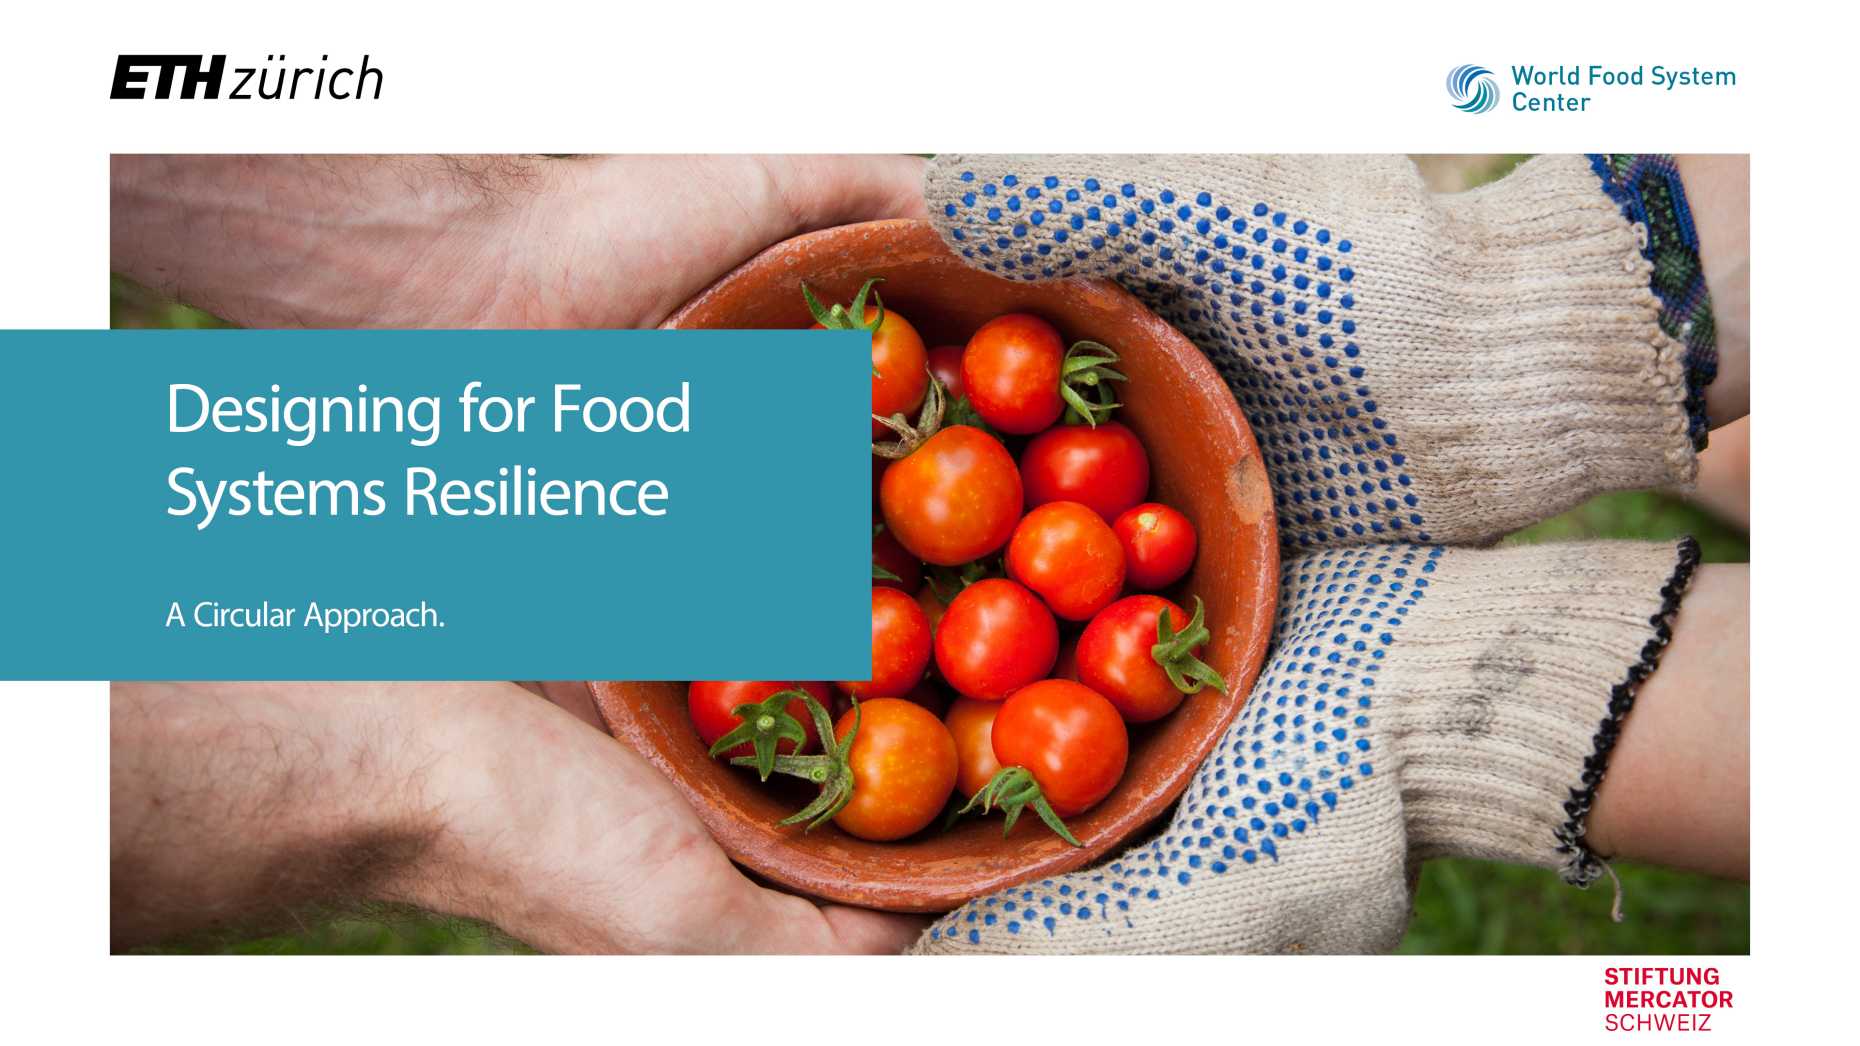 Designing for Food Systems Resilience